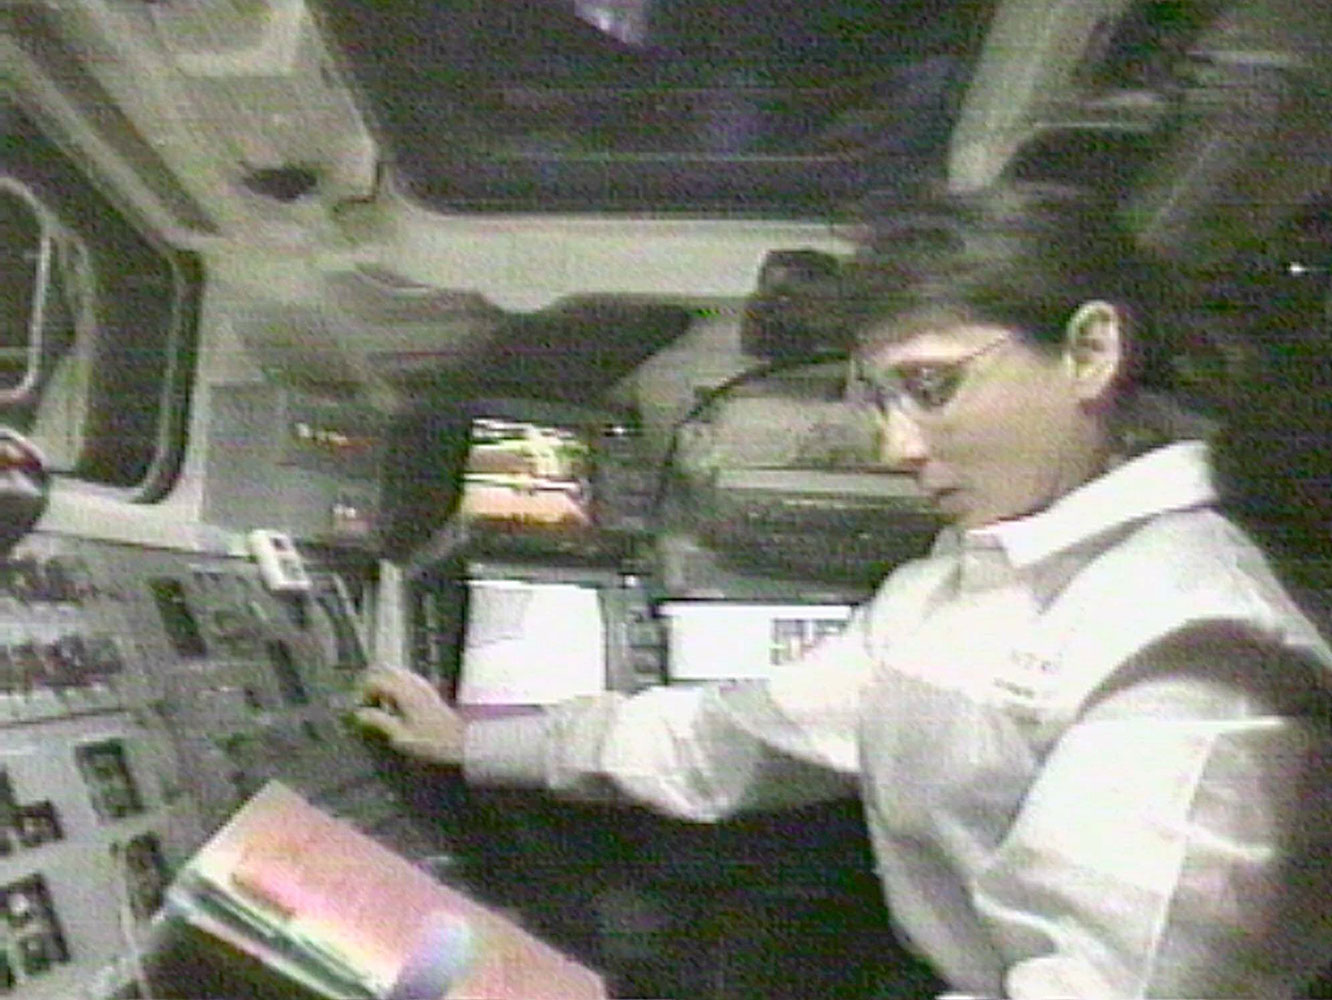 NASA Astronaut Nancy Currie reads a manual as she grapples an arriving space station module, in the cargo bay of the Endeavour, on Dec. 6, 1998.